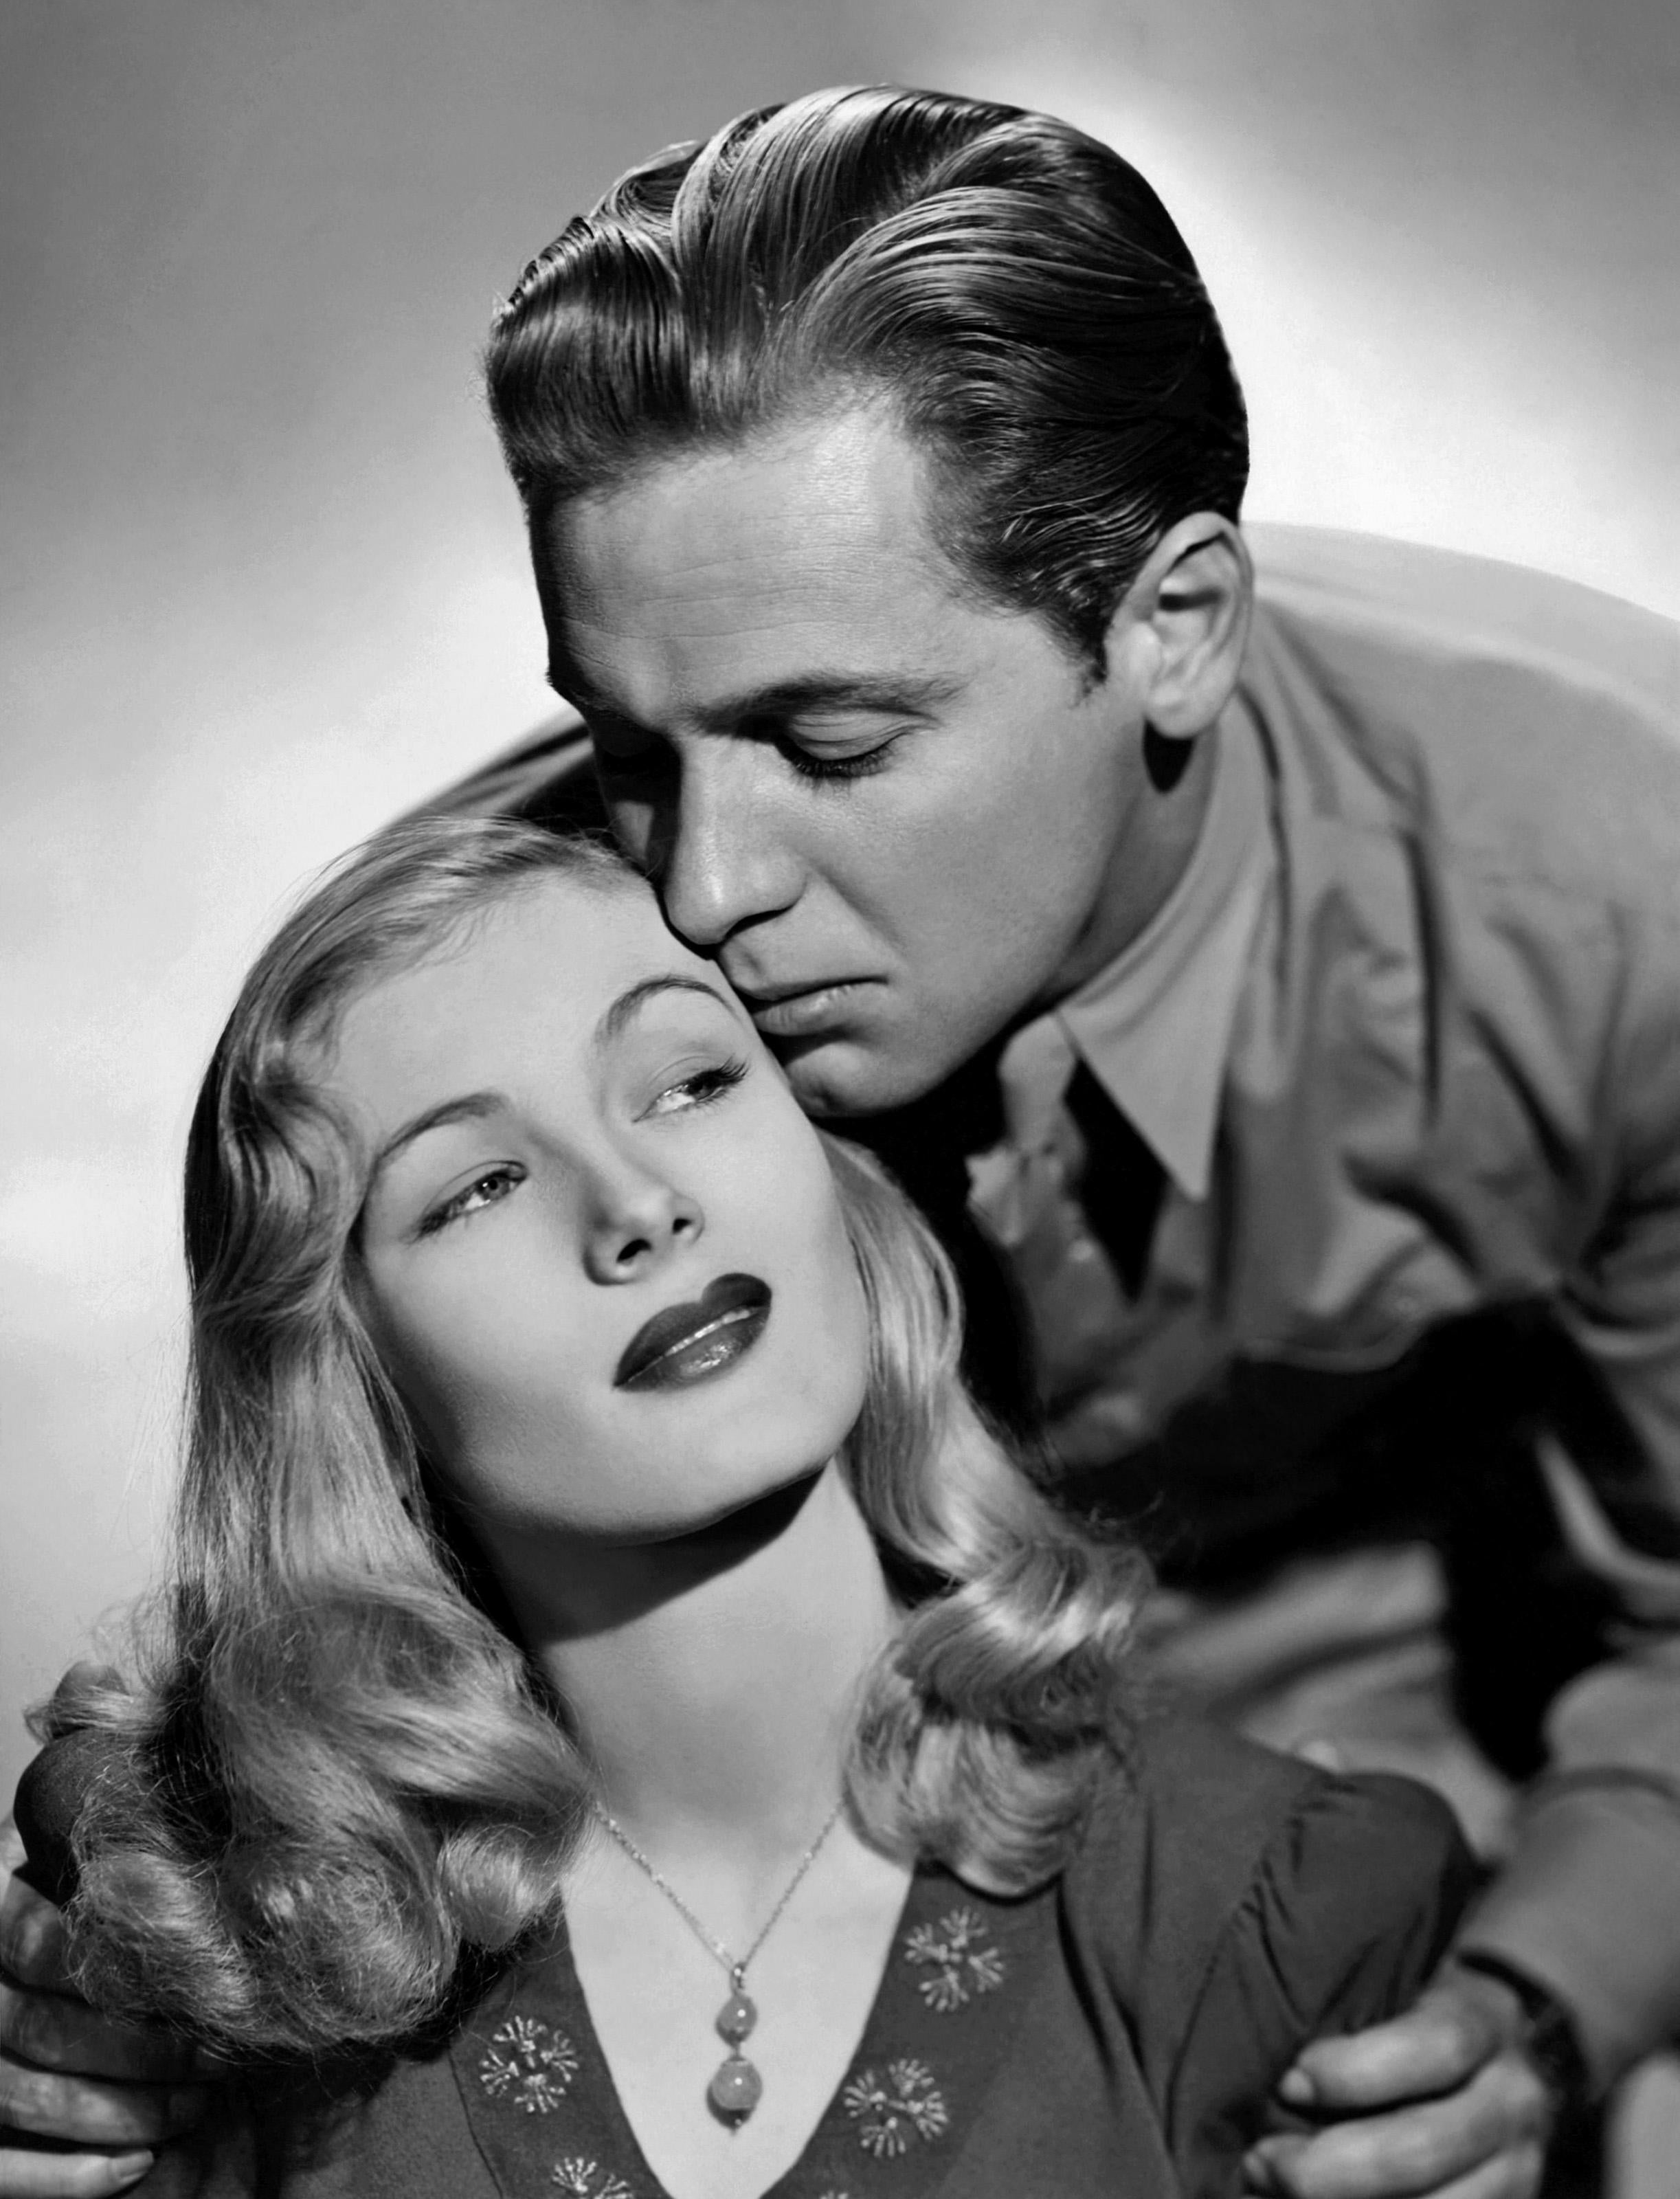 Unknown Portrait Photograph - William Holden and Veronica Lake, "I Wanted Wings" Globe Photos Fine Art Print